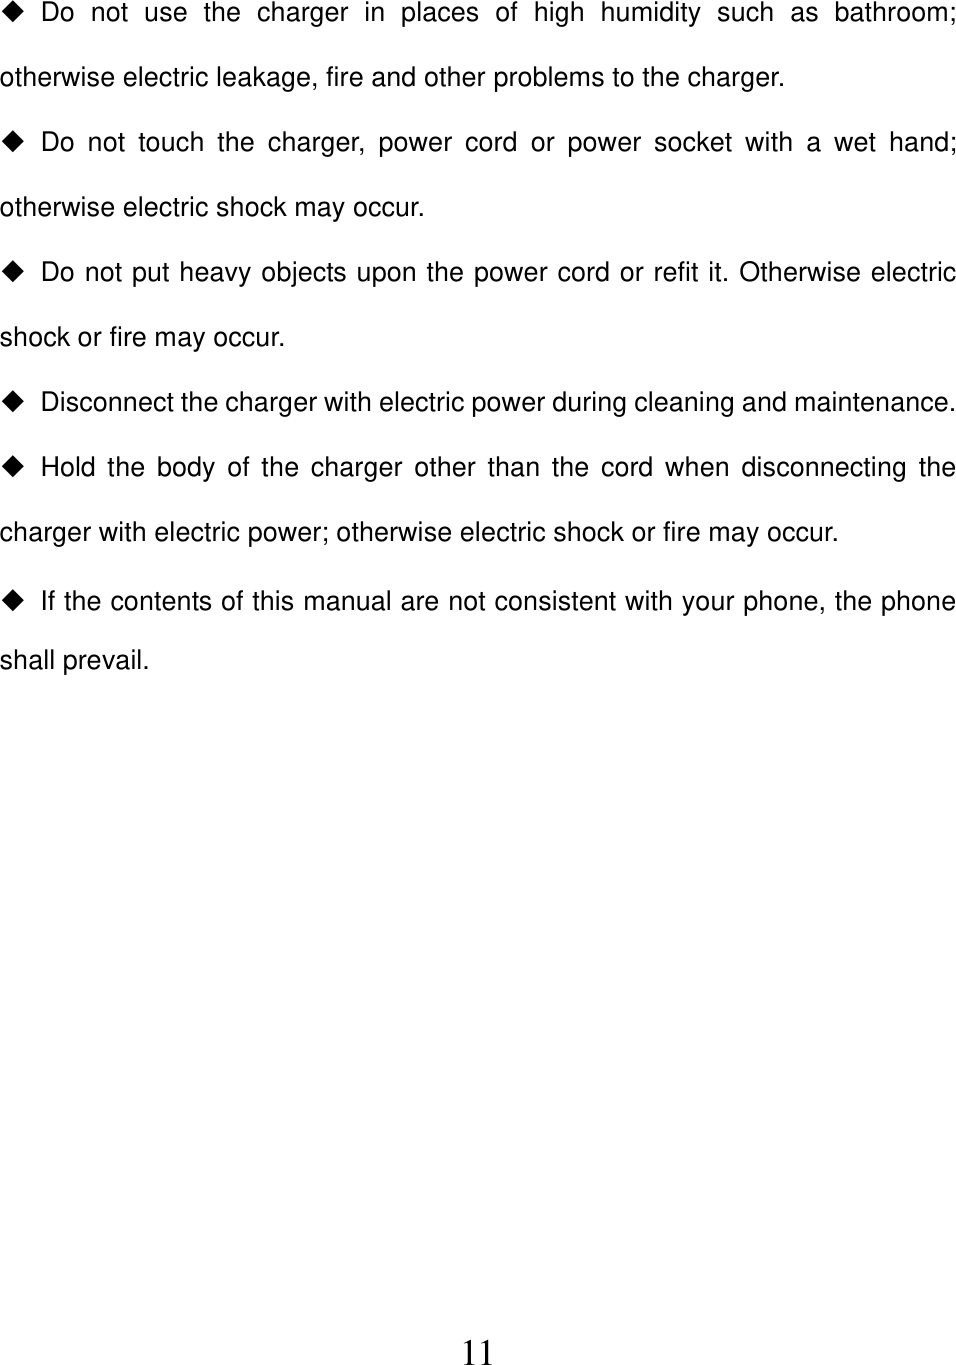  11 Do not use the charger in places of high humidity such as bathroom; otherwise electric leakage, fire and other problems to the charger.  Do not touch the charger, power cord or power socket with a wet hand; otherwise electric shock may occur.   Do not put heavy objects upon the power cord or refit it. Otherwise electric shock or fire may occur.   Disconnect the charger with electric power during cleaning and maintenance.  Hold the body of the charger other than the cord when disconnecting the charger with electric power; otherwise electric shock or fire may occur.   If the contents of this manual are not consistent with your phone, the phone shall prevail.           